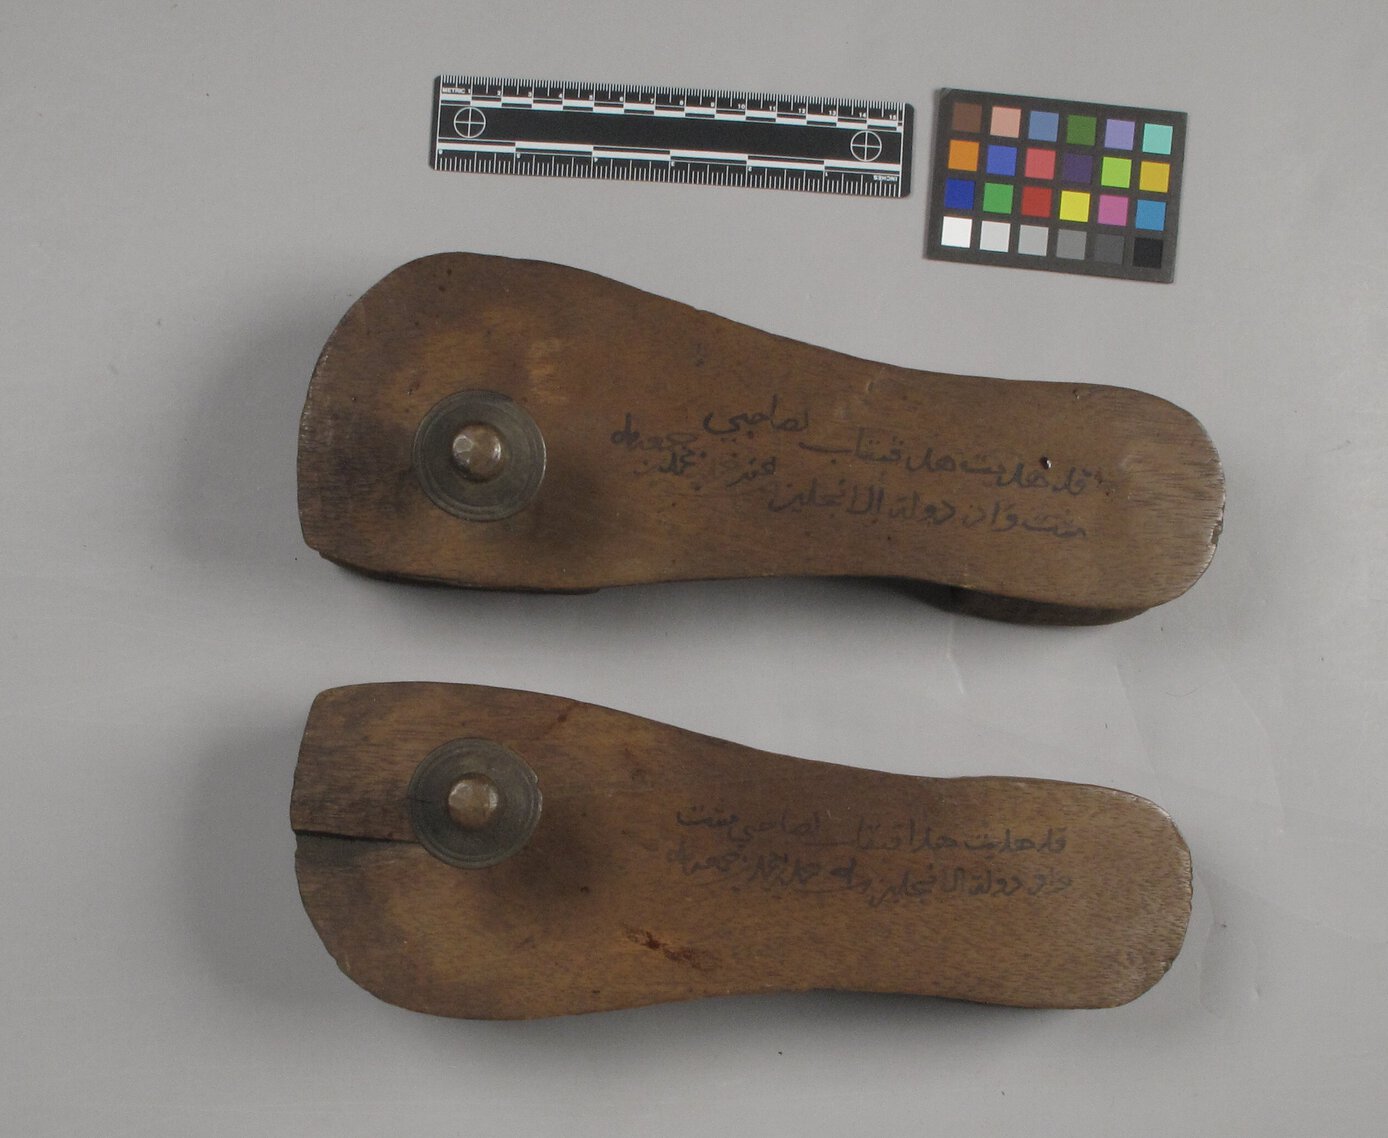 Tippu Tip's inscribed clogs side by side, as viewed from the top with Arabic inscriptions showing.